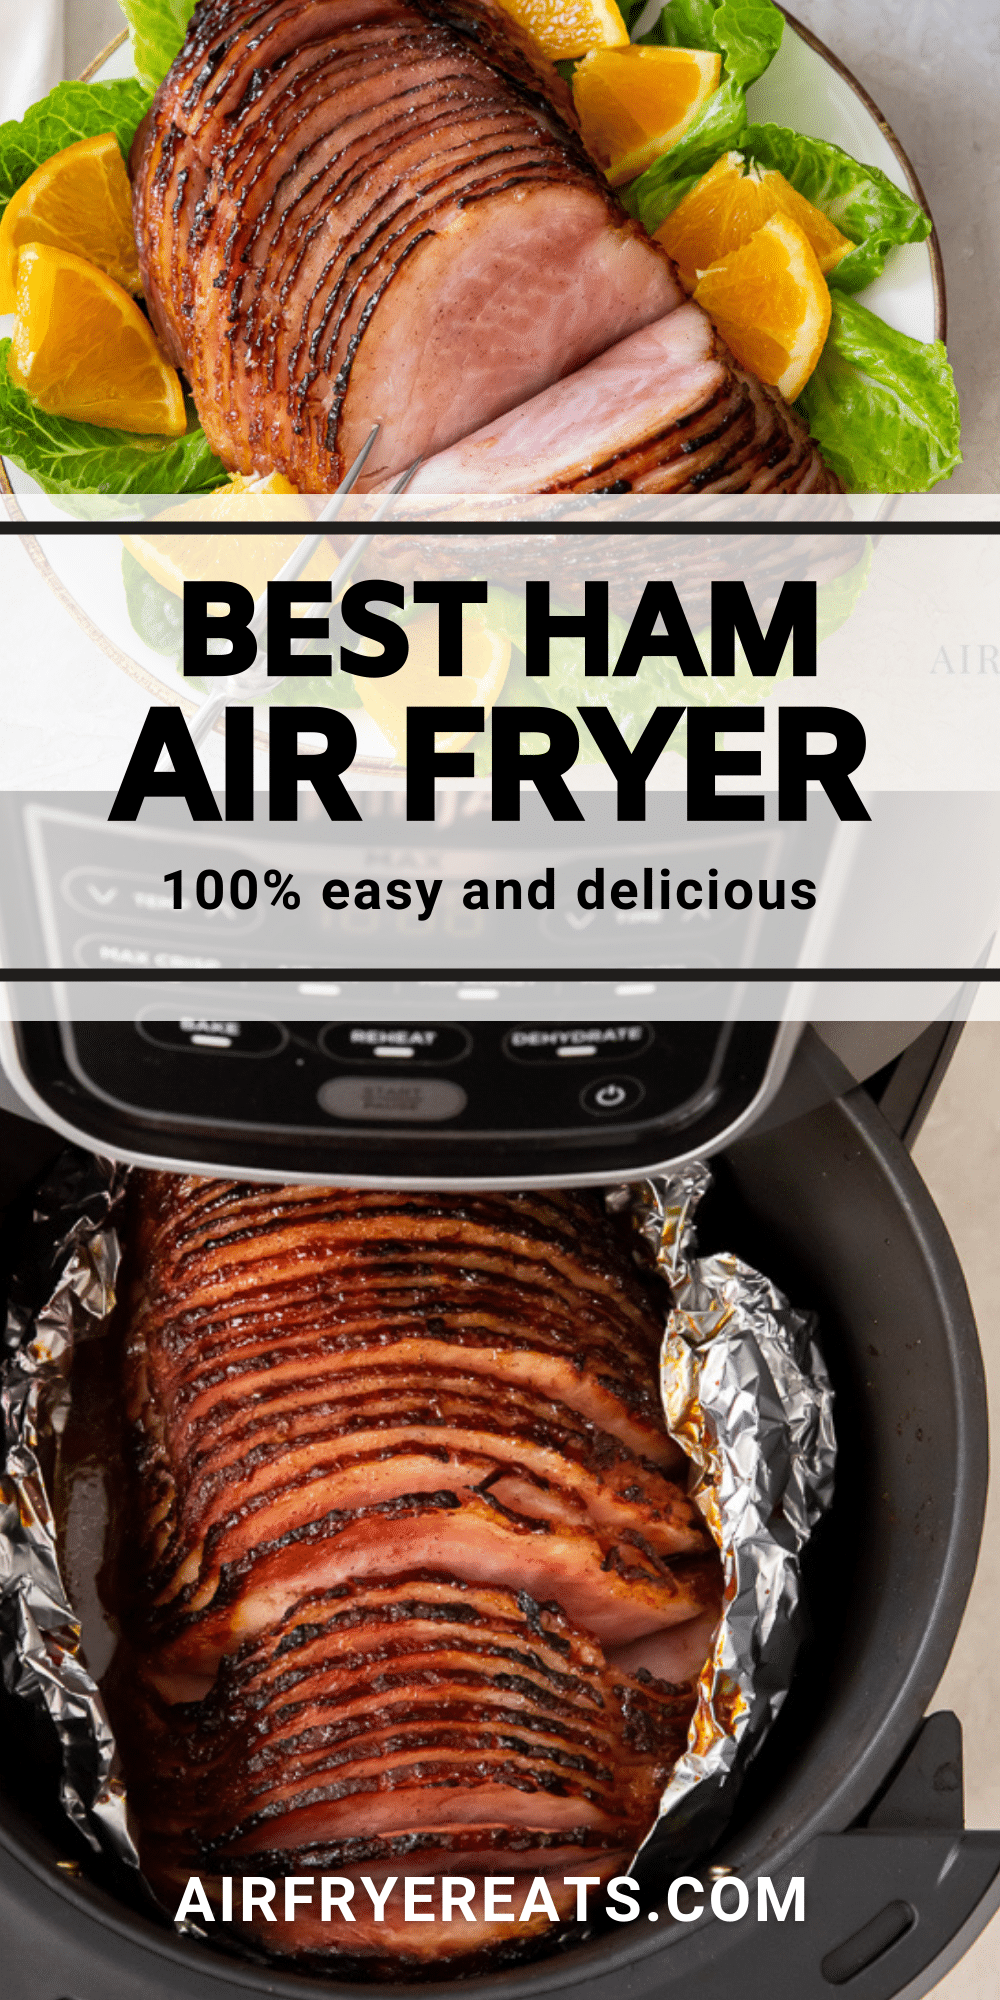 Air Fryer Ham is a time saving way to cook a ham for a holiday dinner or weekend meal. A homemade maple glaze makes this air fryer ham recipe the best you'll find. #airfryerham #holidayham via @vegetarianmamma